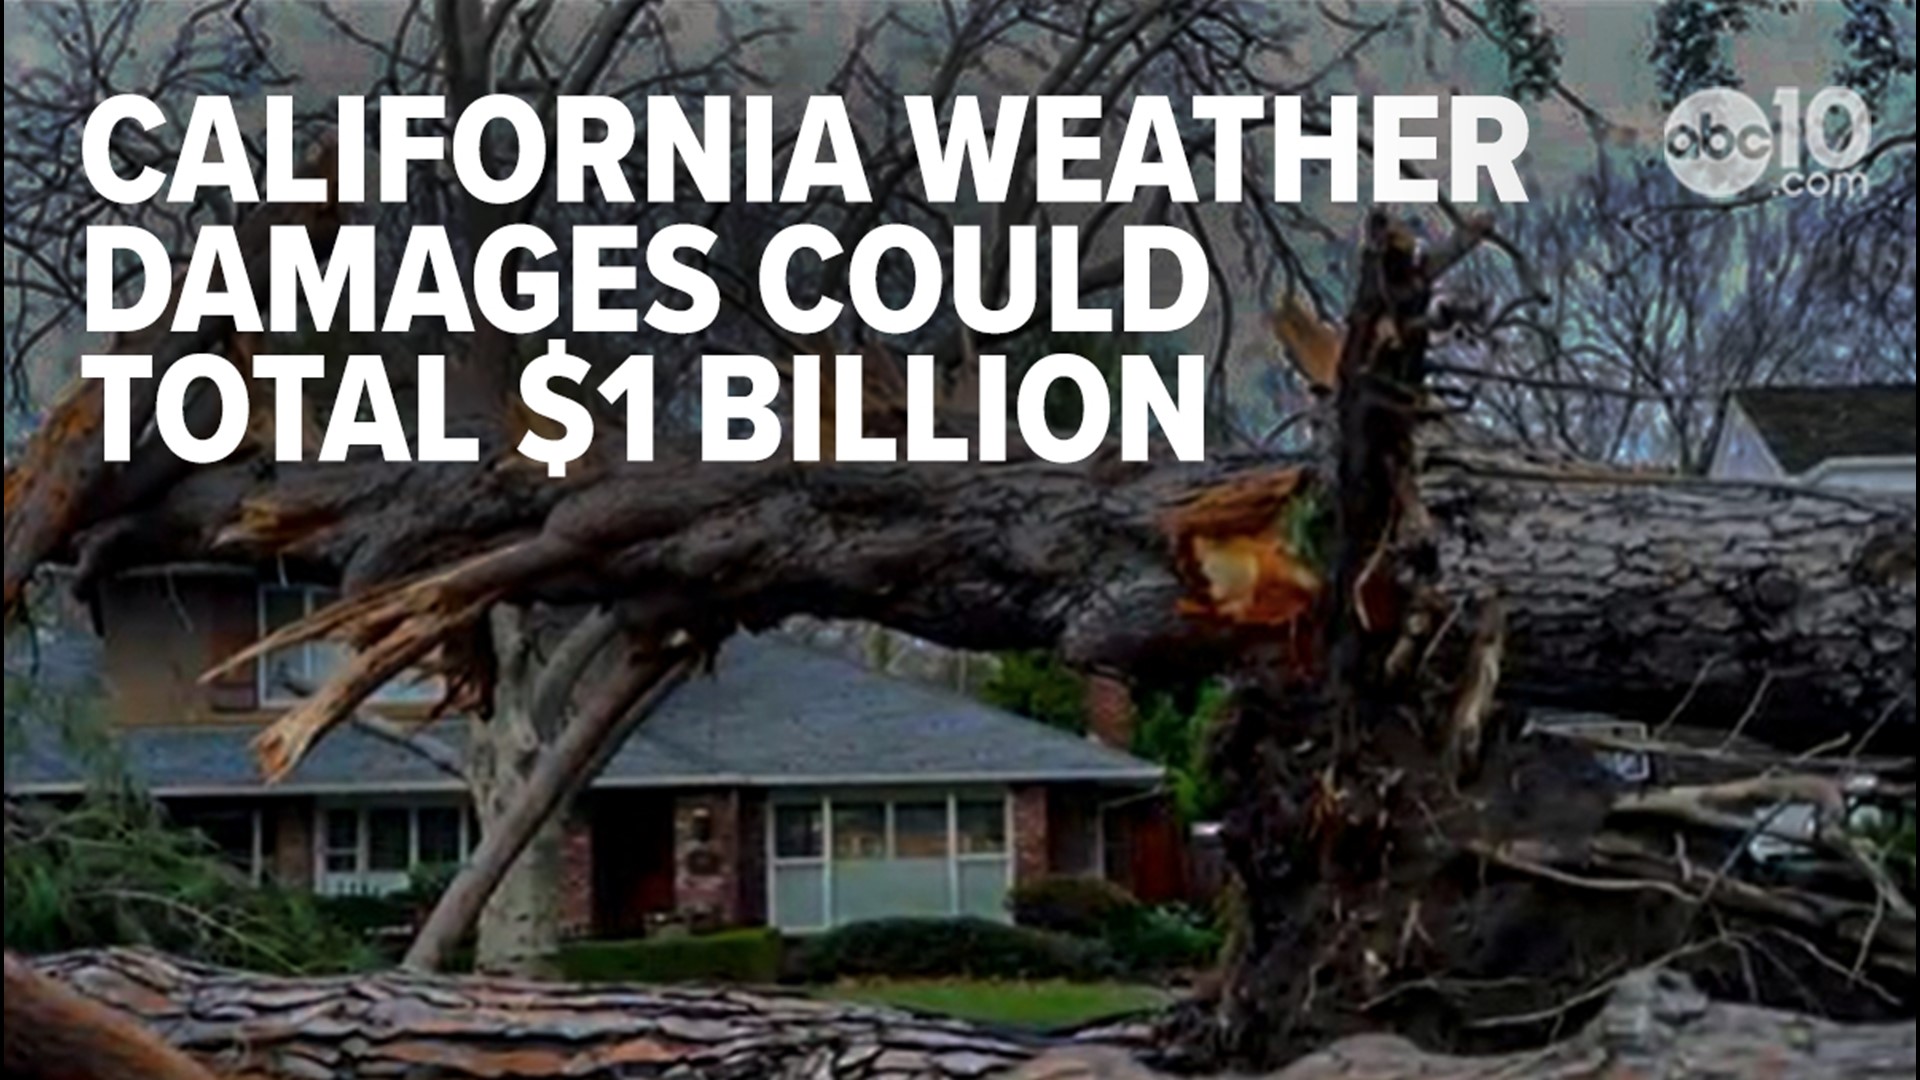 Residents across California are suffering extreme weather damage to their properties, and it's likely to add up to more than $1 billion.